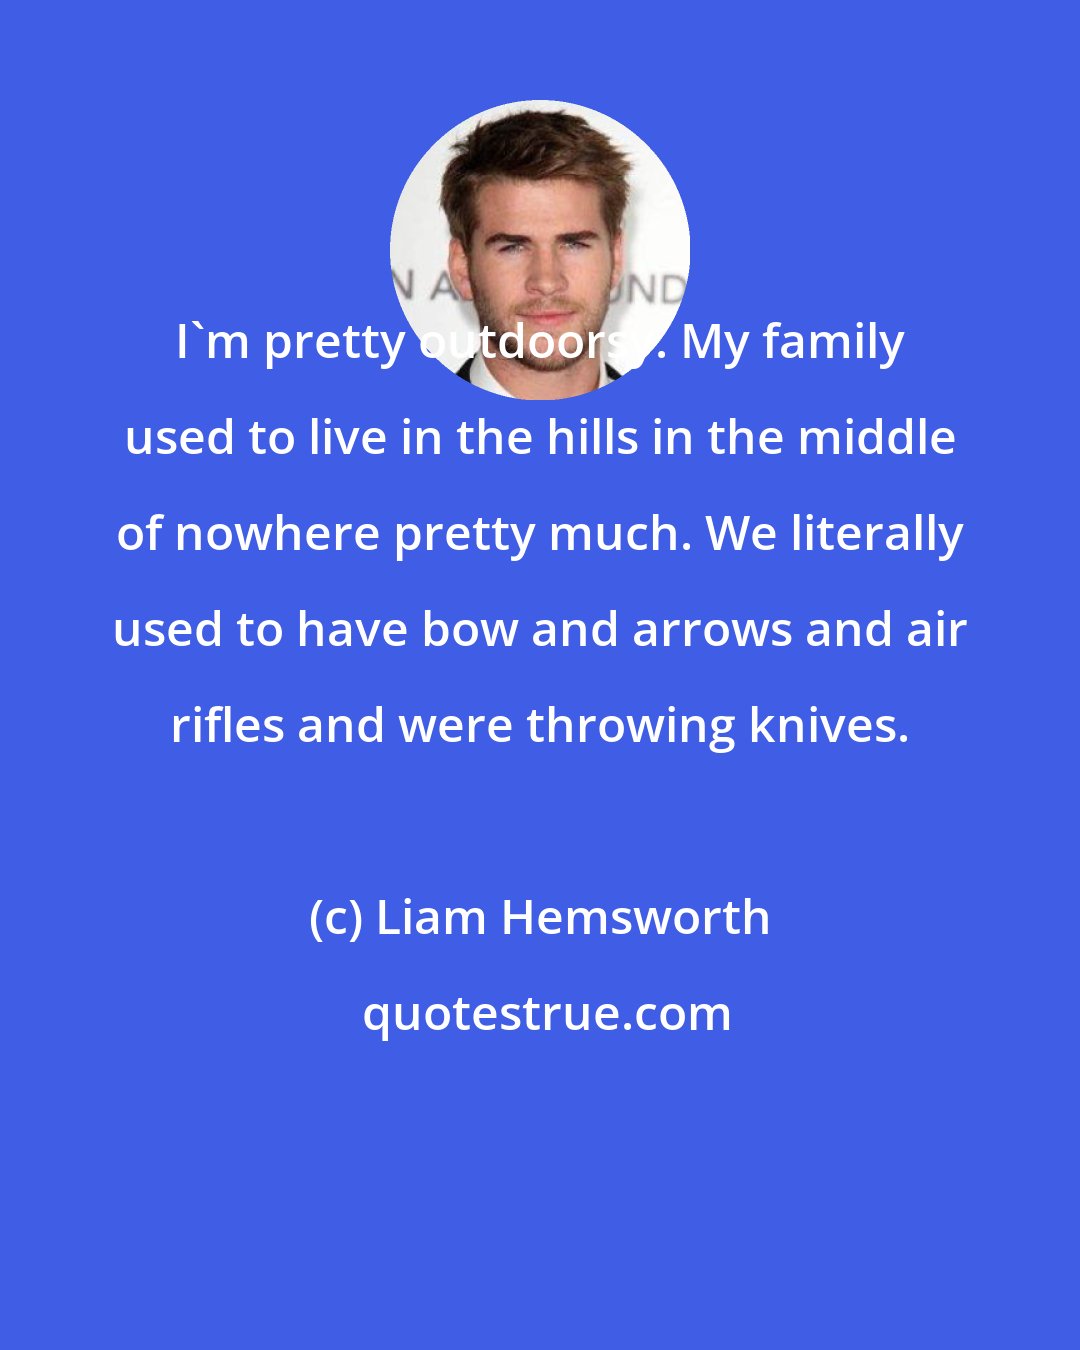 Liam Hemsworth: I'm pretty outdoorsy. My family used to live in the hills in the middle of nowhere pretty much. We literally used to have bow and arrows and air rifles and were throwing knives.